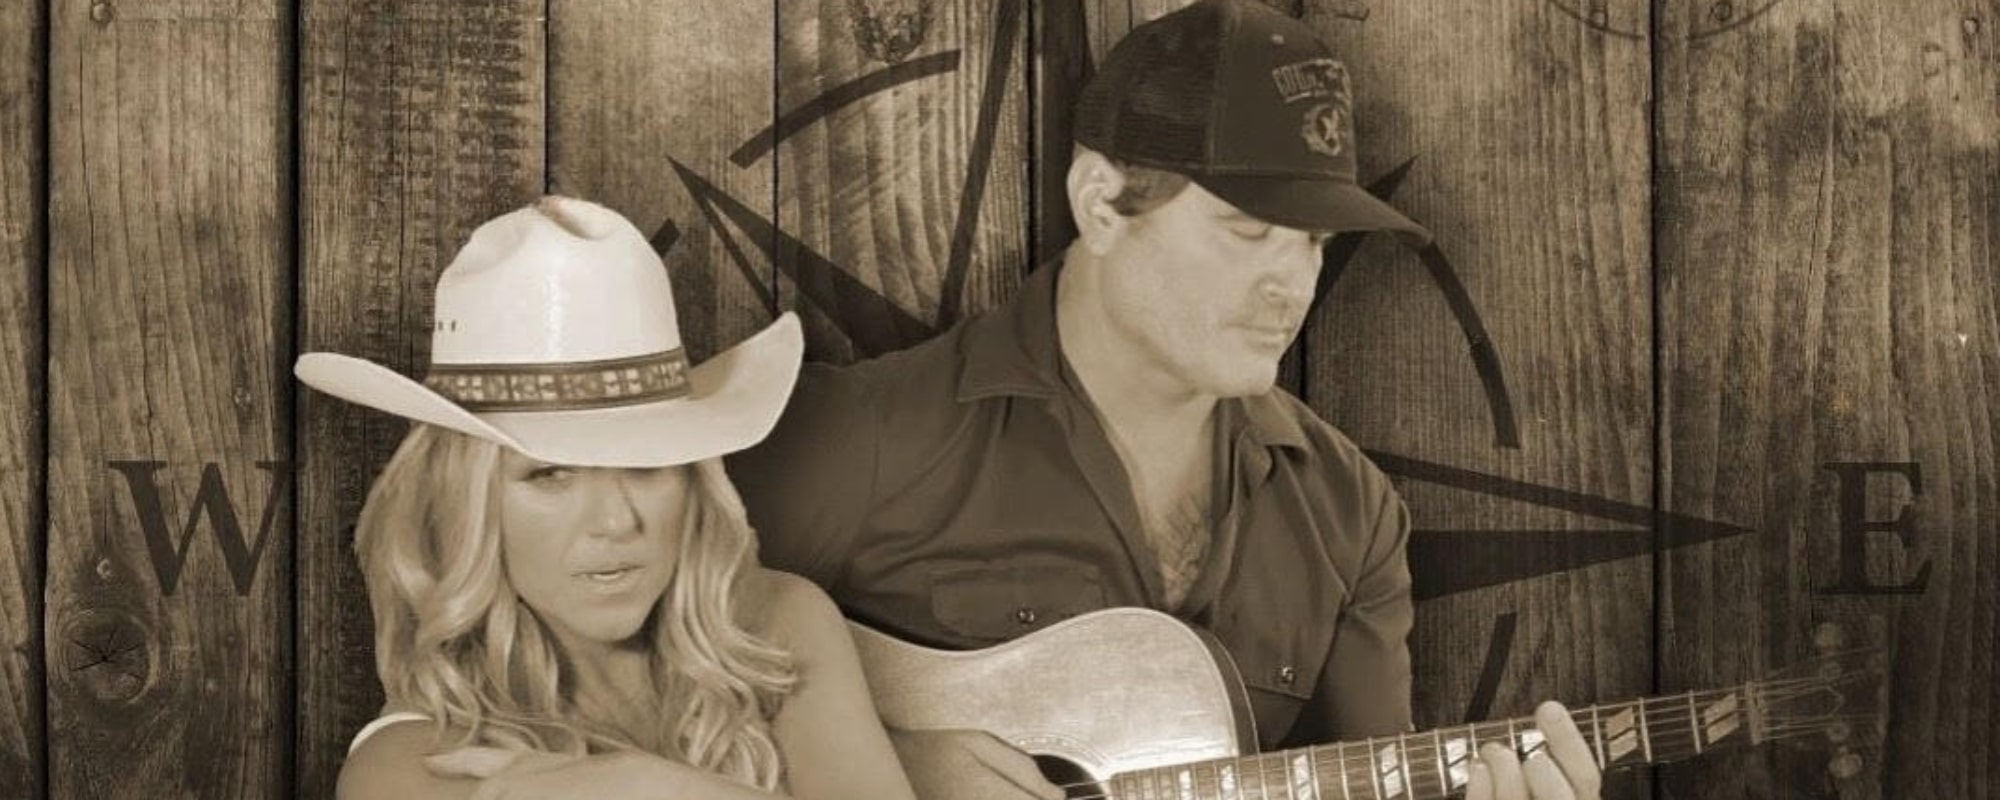 Leah Turner and Jerrod Niemann Team Up for Acoustic Version of “South of the Border”